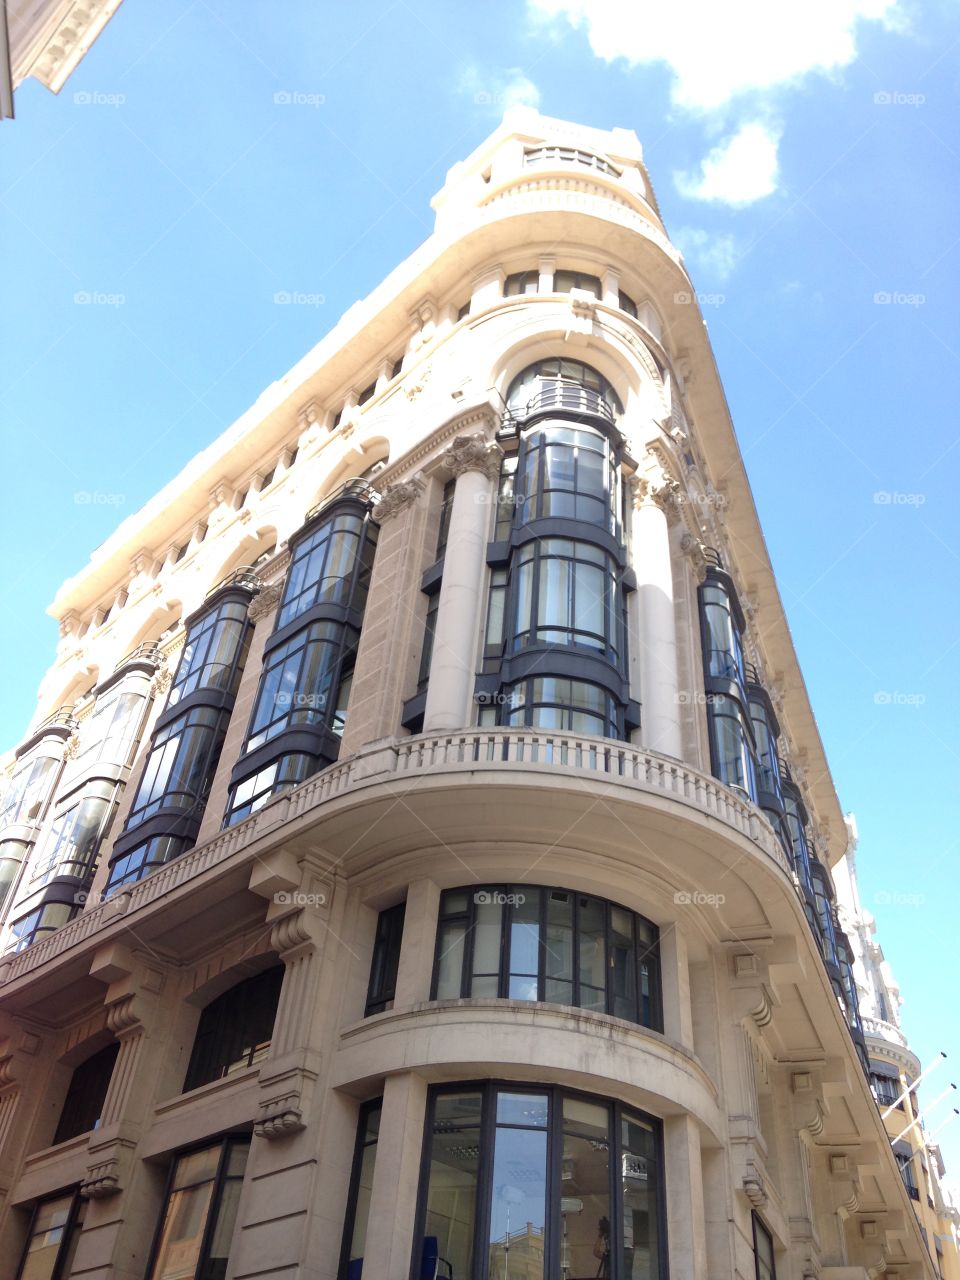 Sunny Madrid . Architecture in Madrid, Spain 